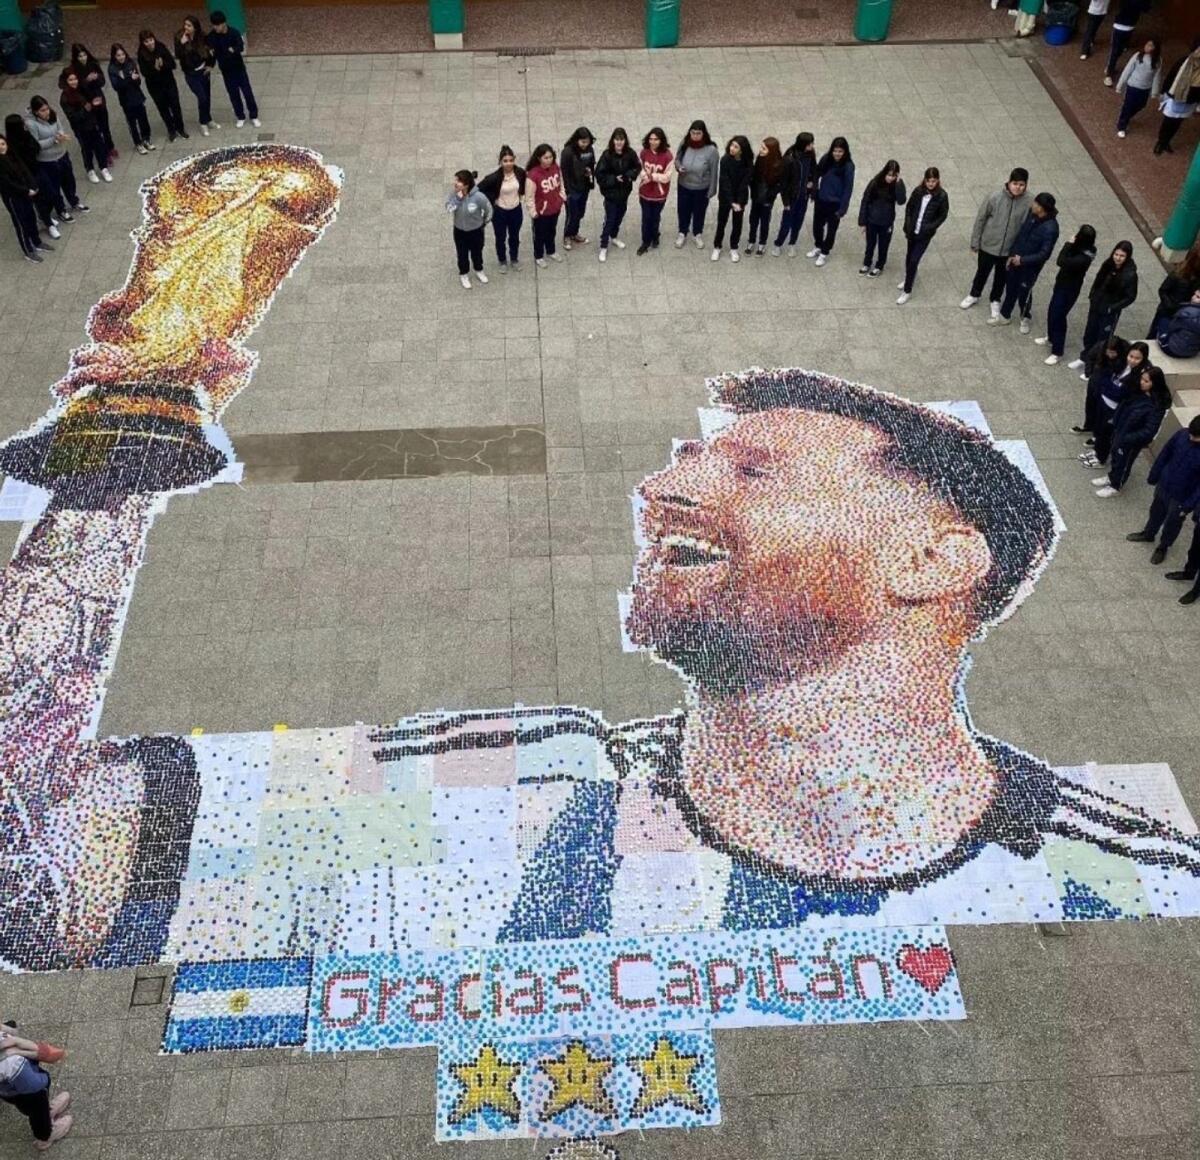 Students pose in front of the Lionel Messi mural. — X